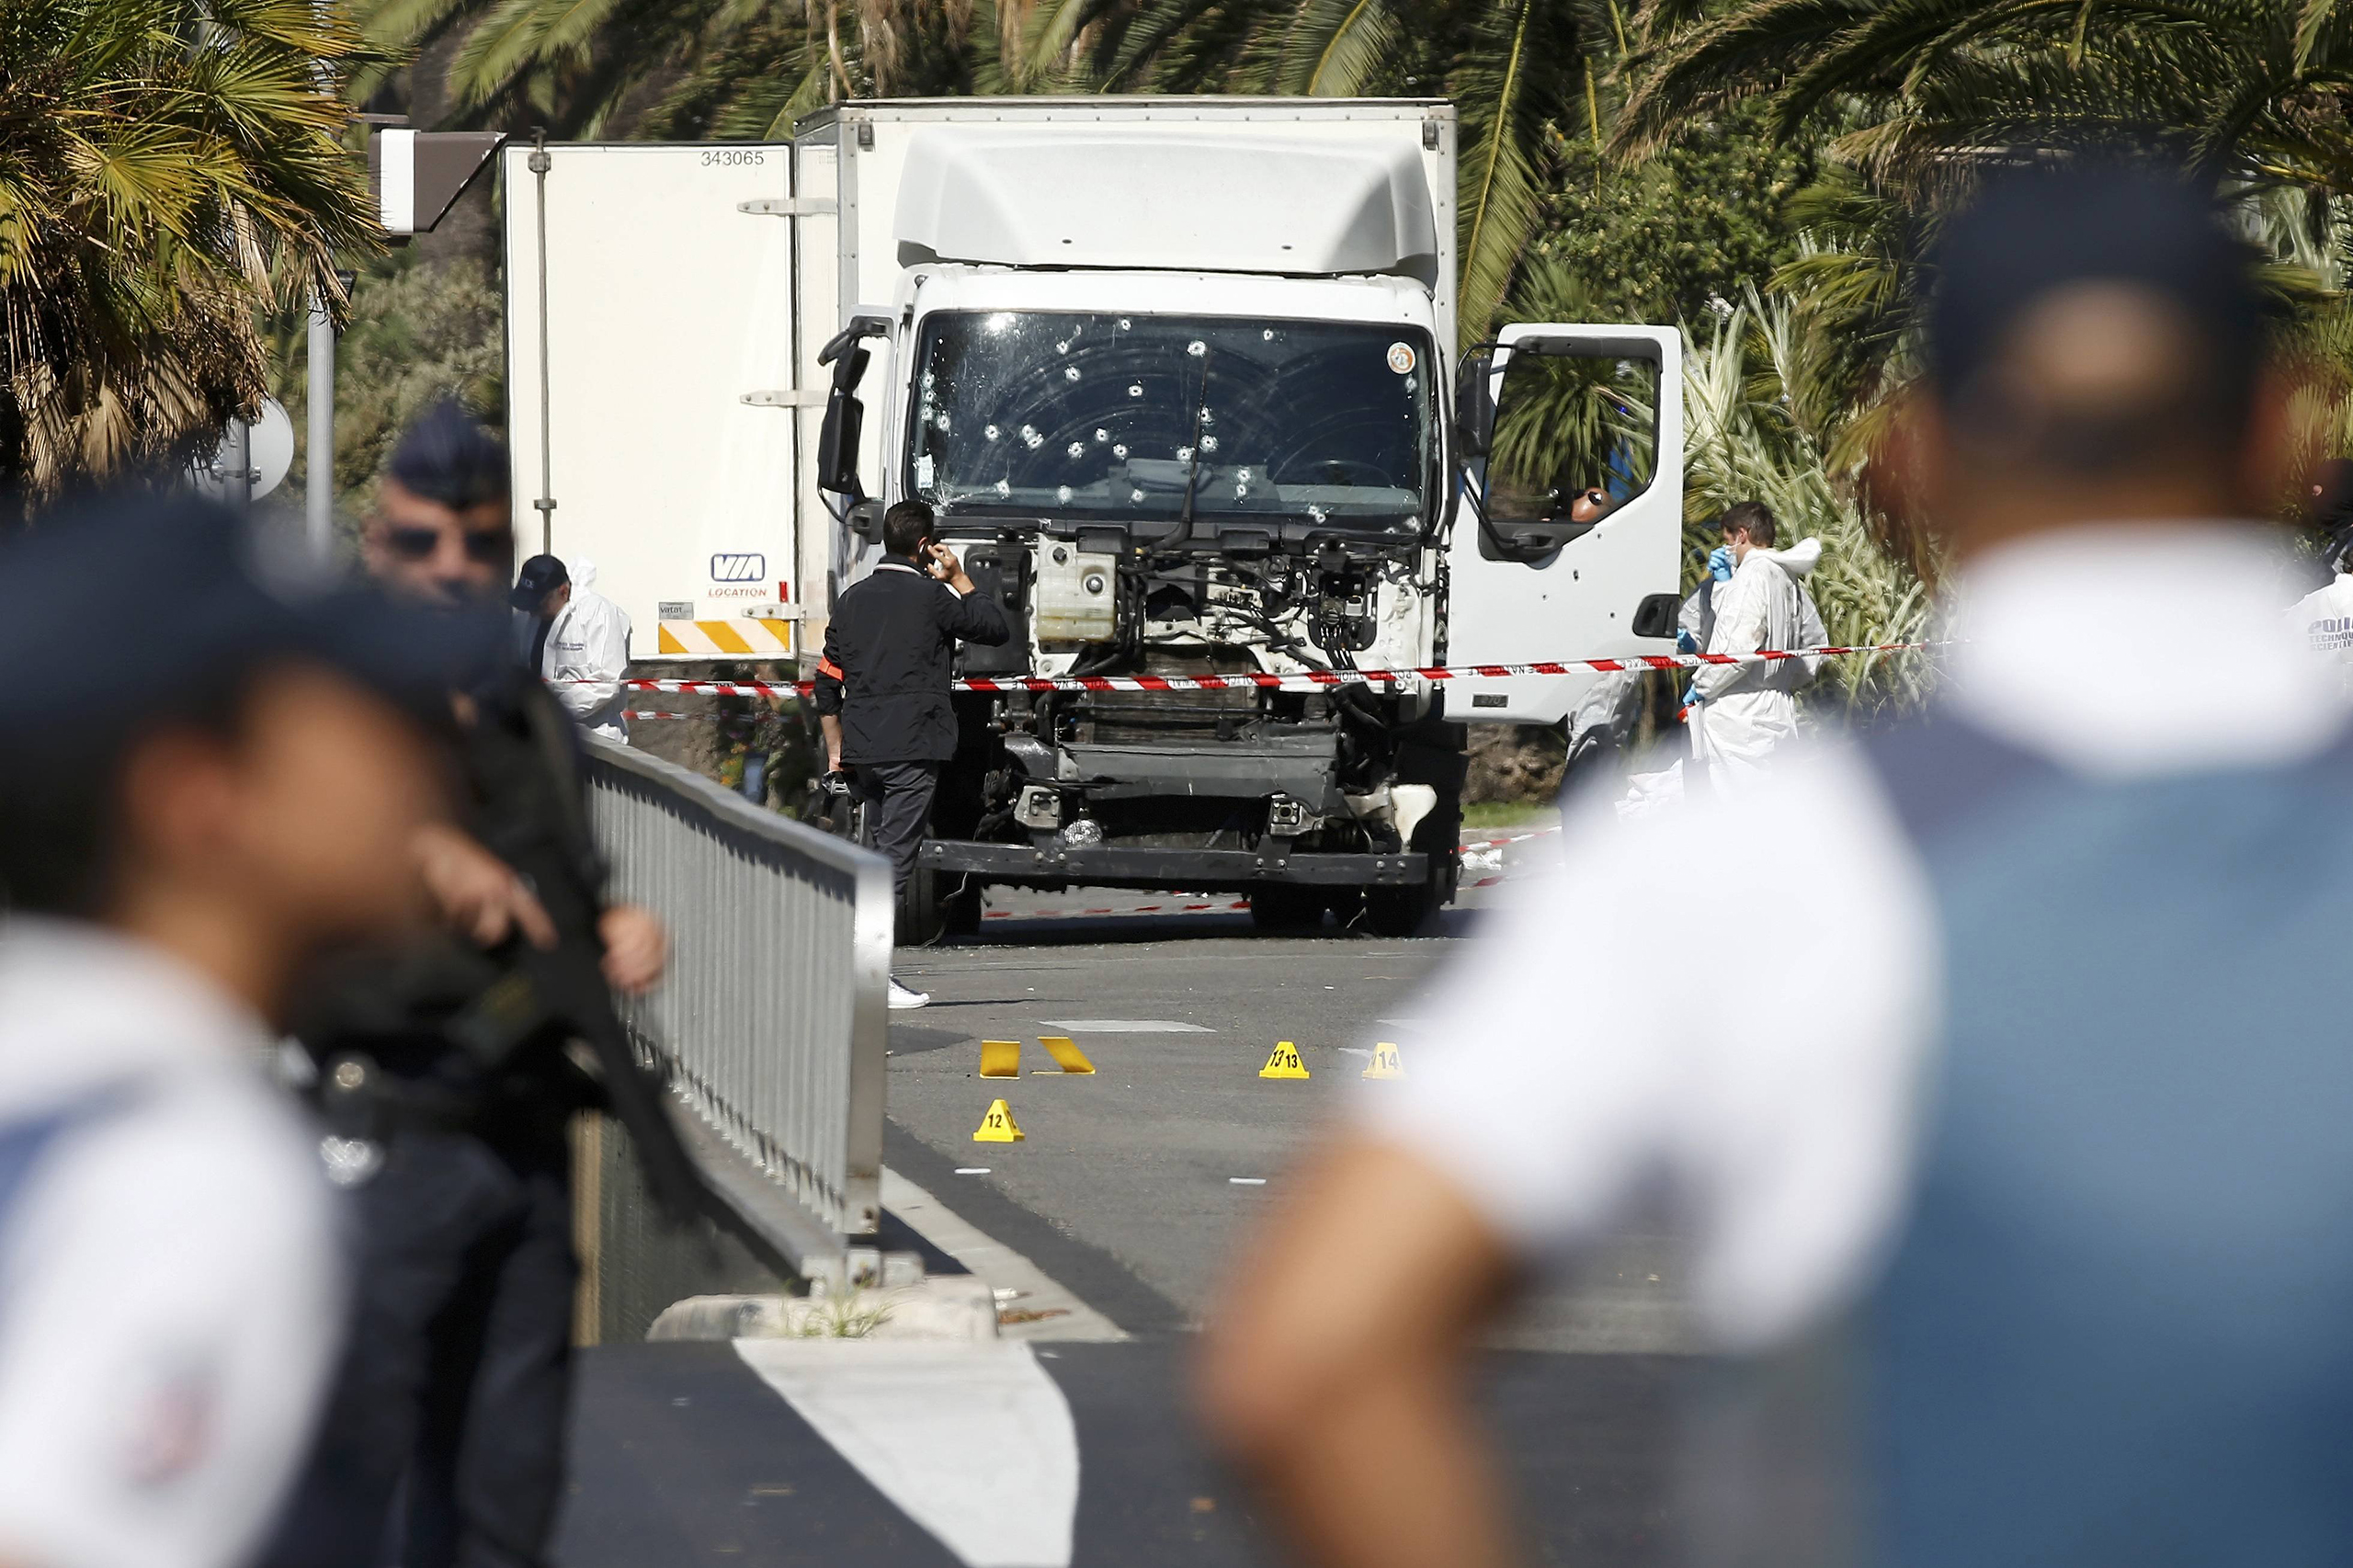 French police secure the area as the investigation continues at the scene near the truck that ran into a crowd at high speed, killing scores who were celebrating Bastille Day on July 14, on the Promenade des Anglais in Nice, France, on July 15, 2016. (Eric Gaillard—Reuters)